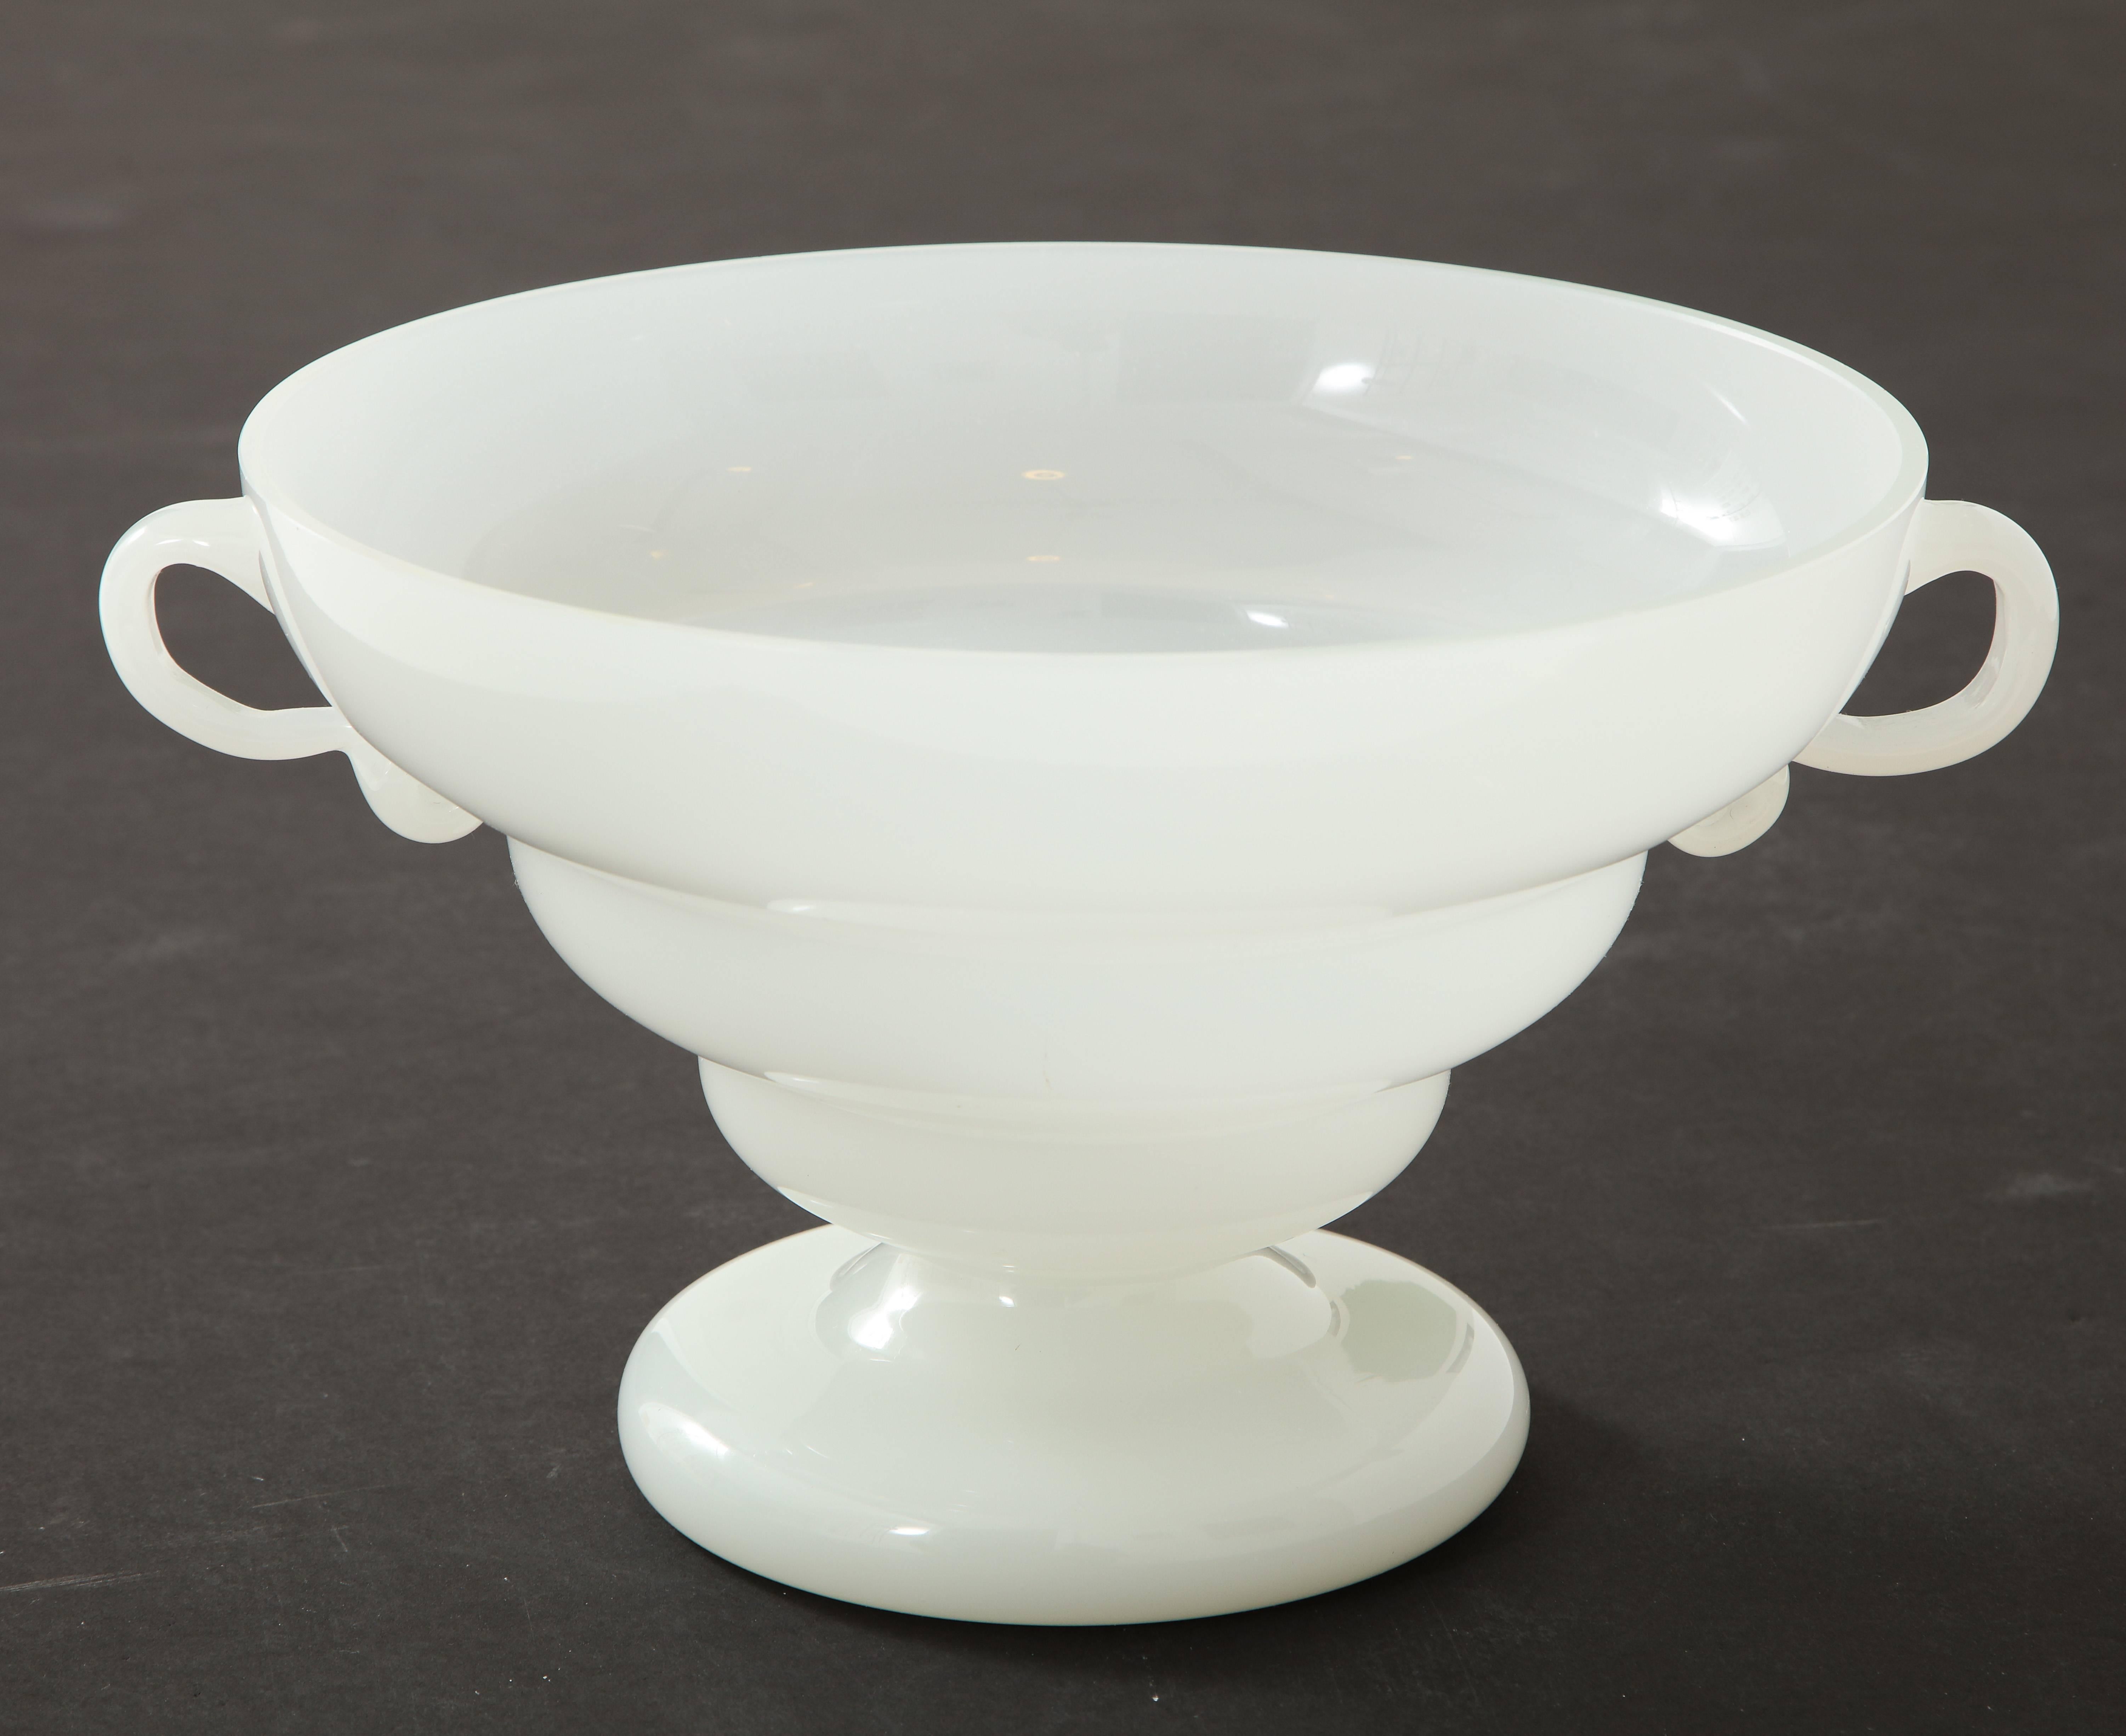 A very delicate and Fine Italian 1930s opaline glass bowl with graduated centre stem and circular base support, with handles on both sides.
Italy, circa 1930
Size: 8